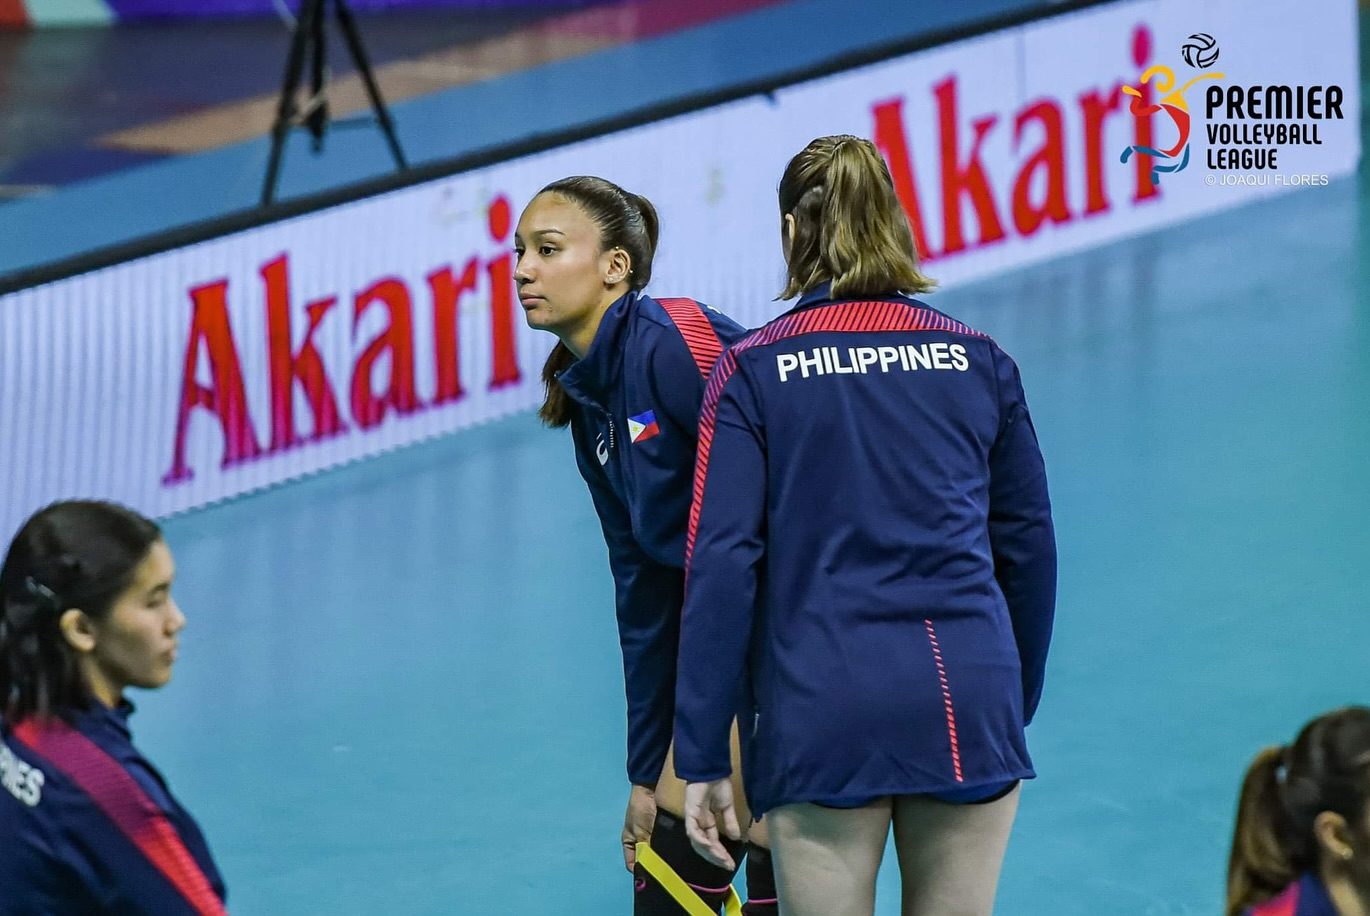 No role too small for Faith Nisperos in Alas Pilipinas’ unbeaten romp